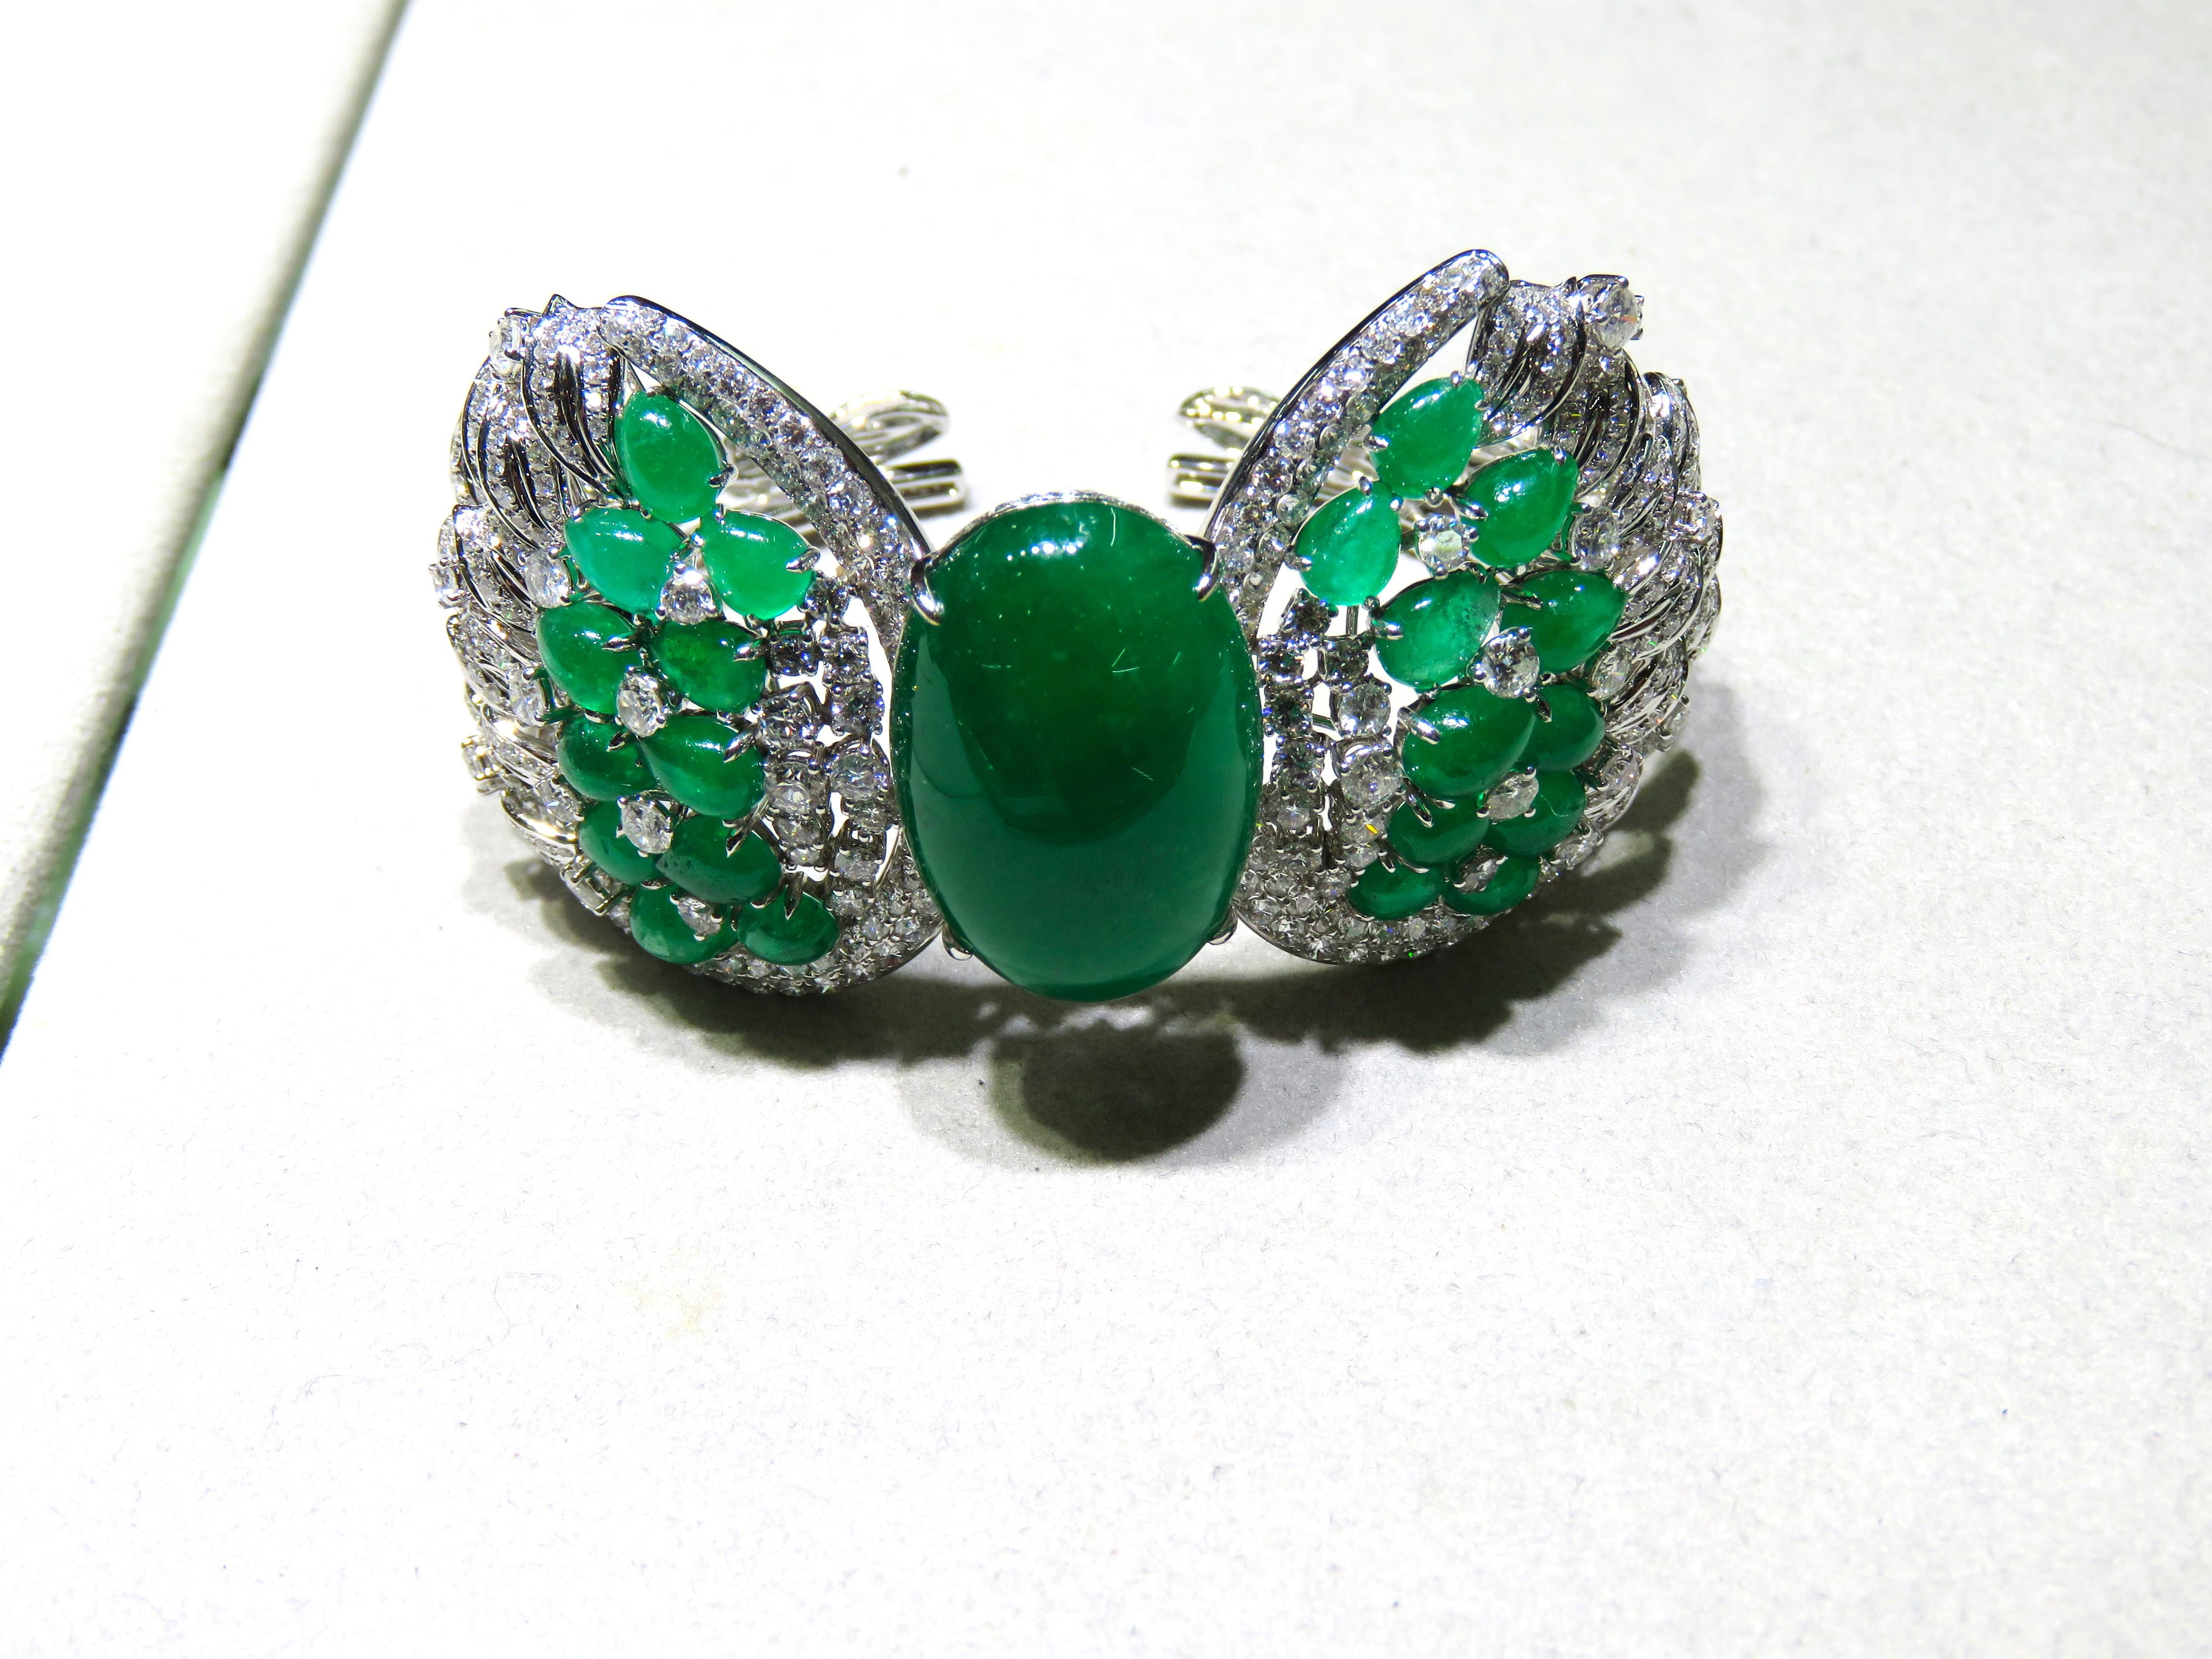 The Following Item we are offering is a Rare Important Radiant 18KT Gold Large Fancy Large Emerald and Diamond Bangle Bracelet Cuff.  Bracelet is comprised of Gorgeous Fancy Large Emeralds surrounded with Beautiful Glittering Fancy Diamonds. T.C.W